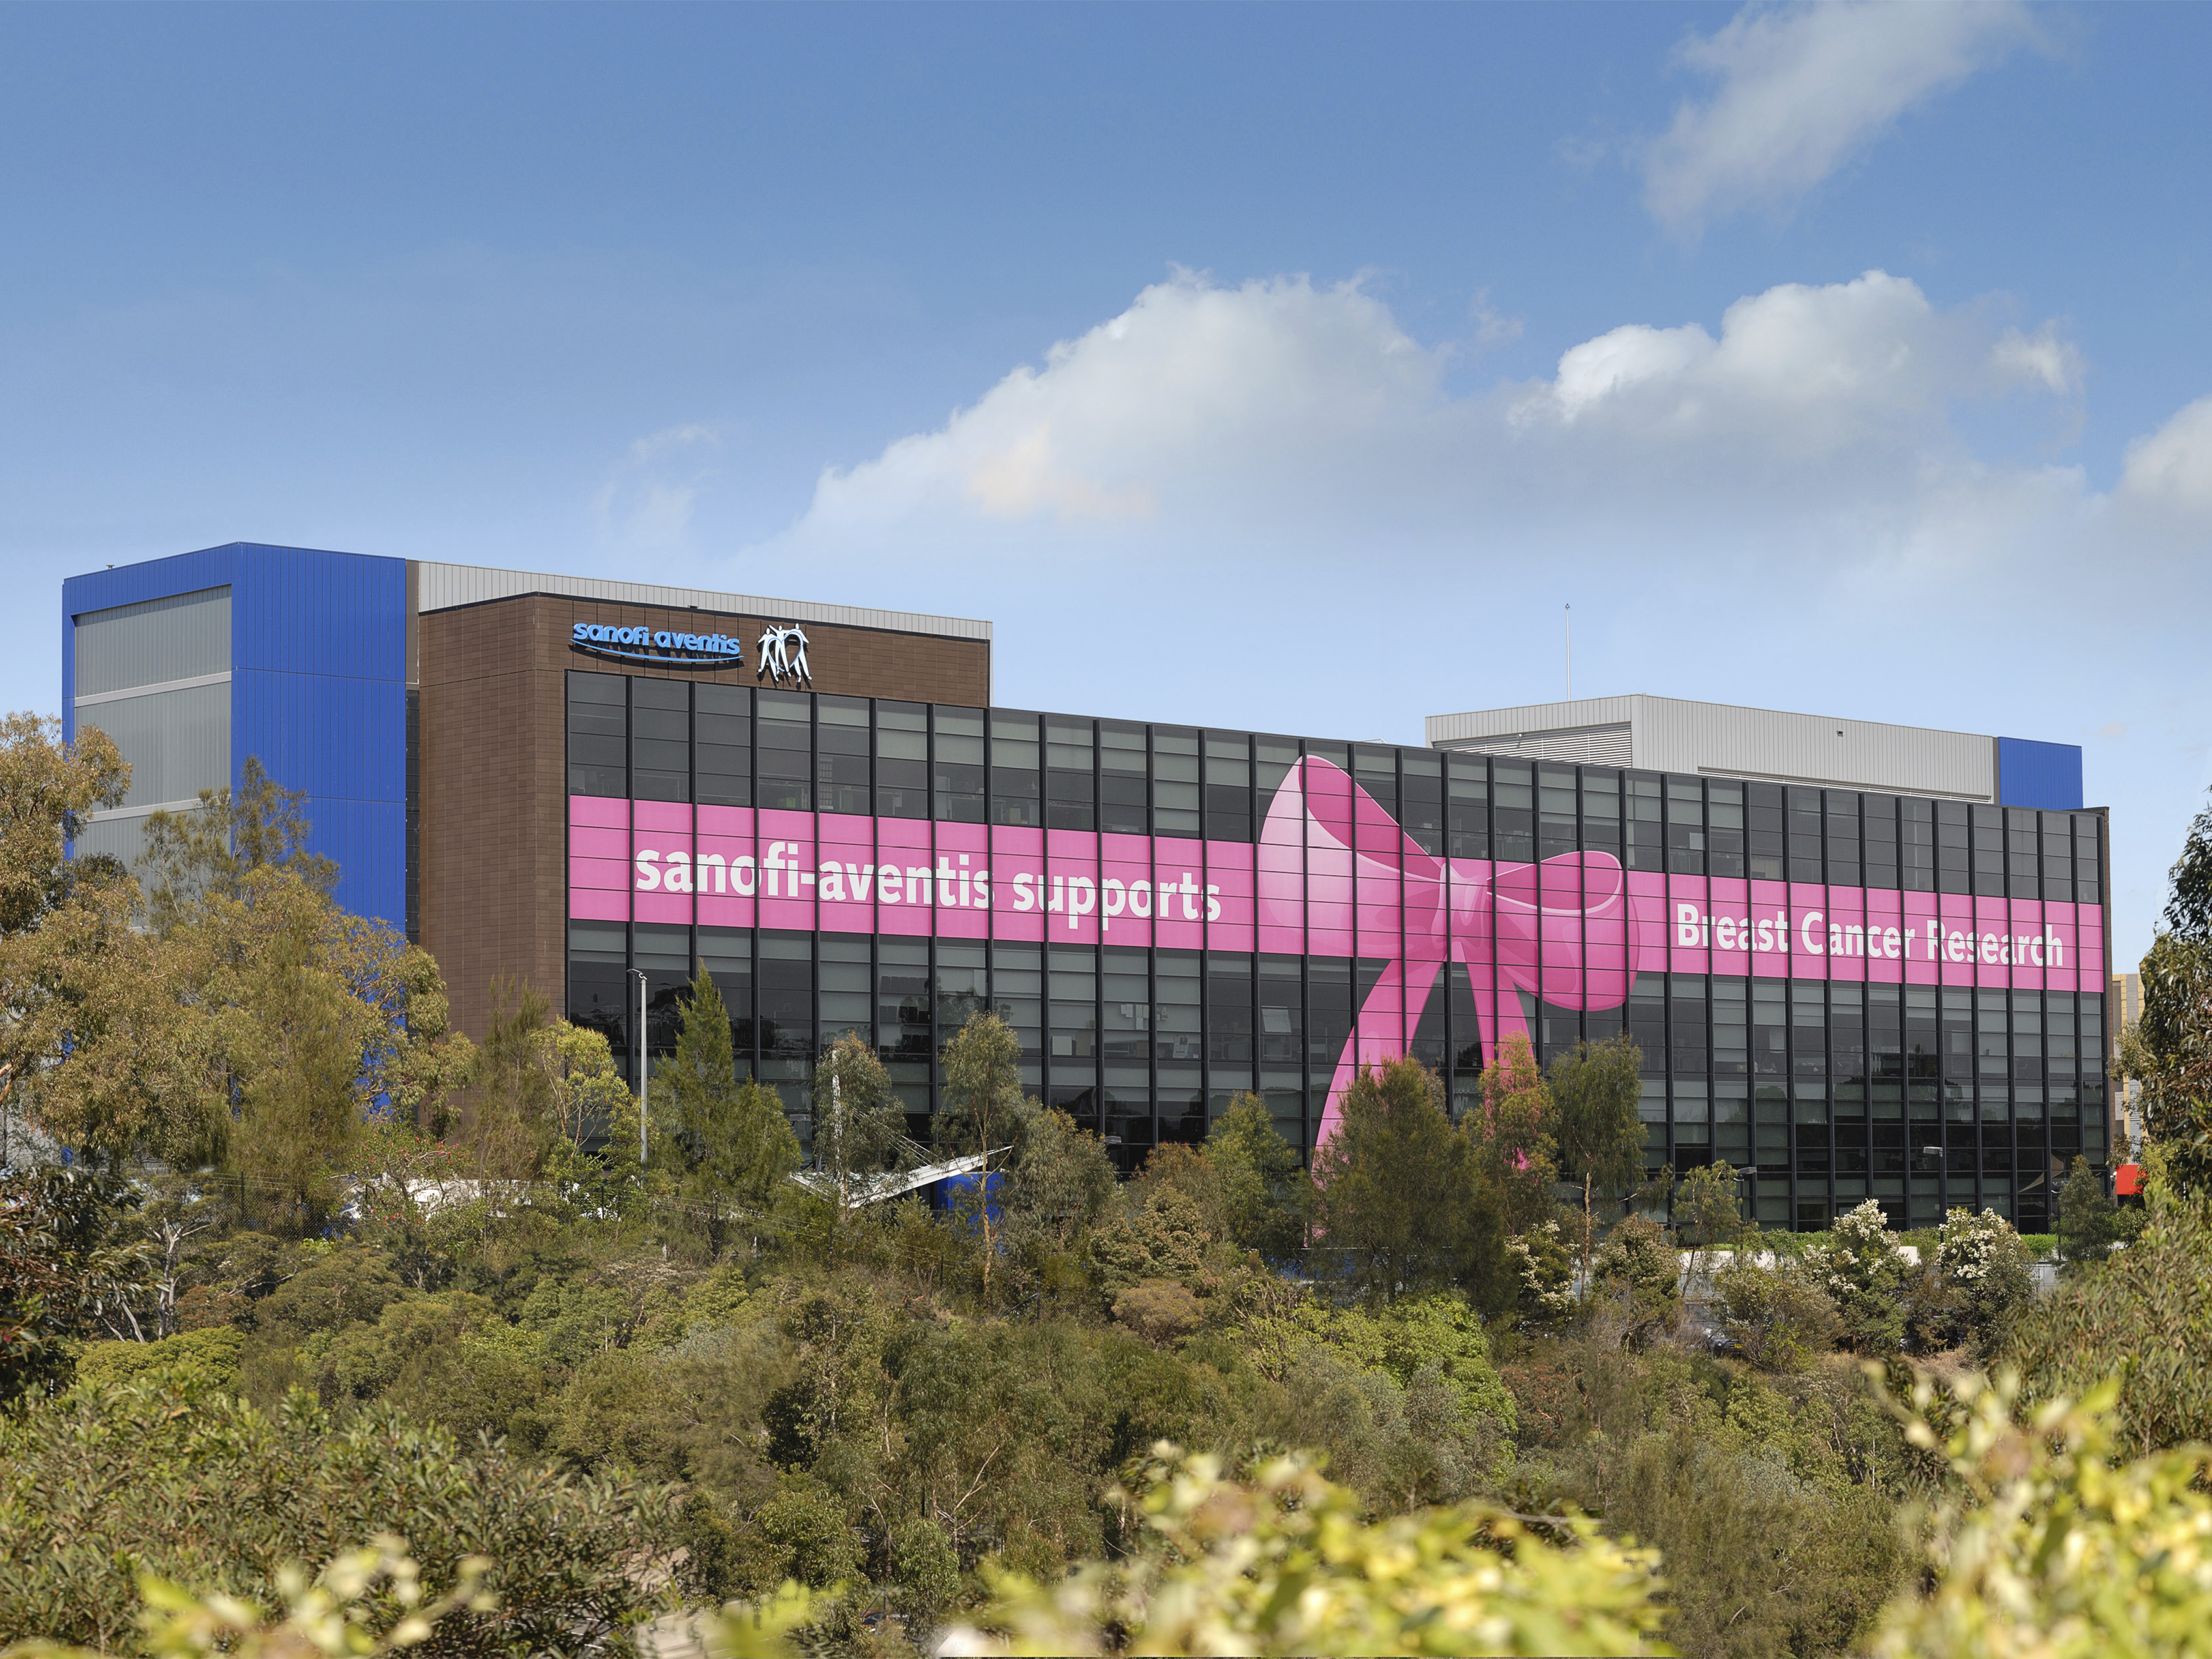 Building wrap - Sanofi supports breast cancer research